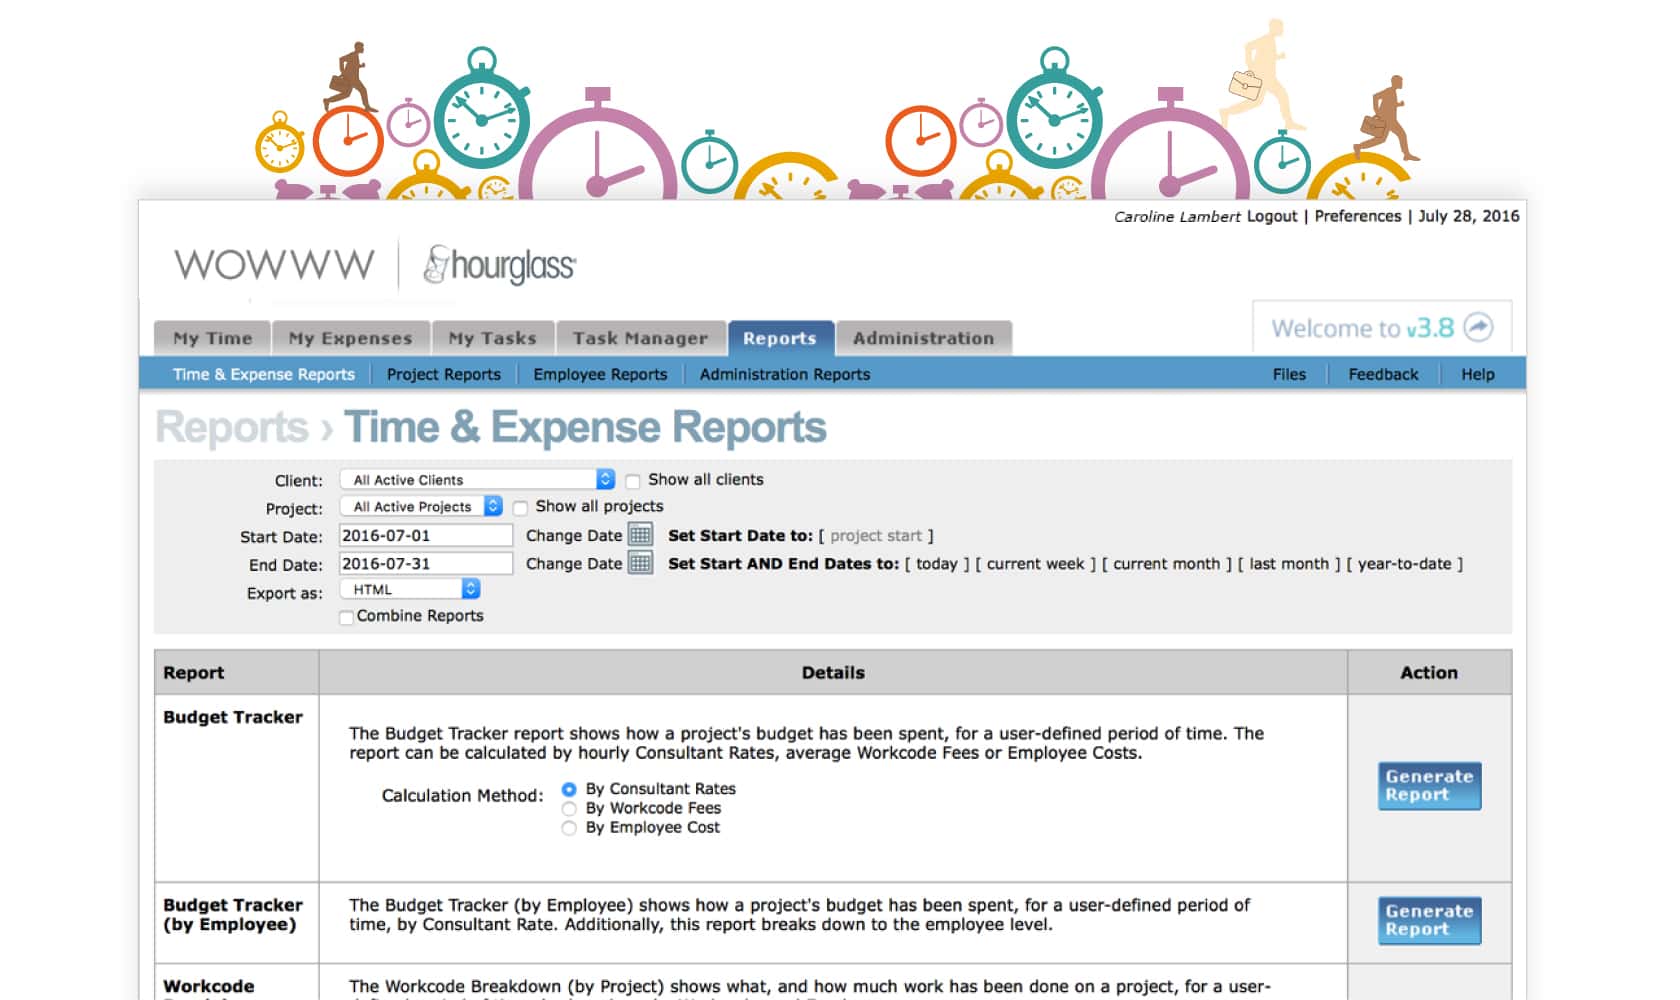 Screenshot of the Reports page within the HourGlass application